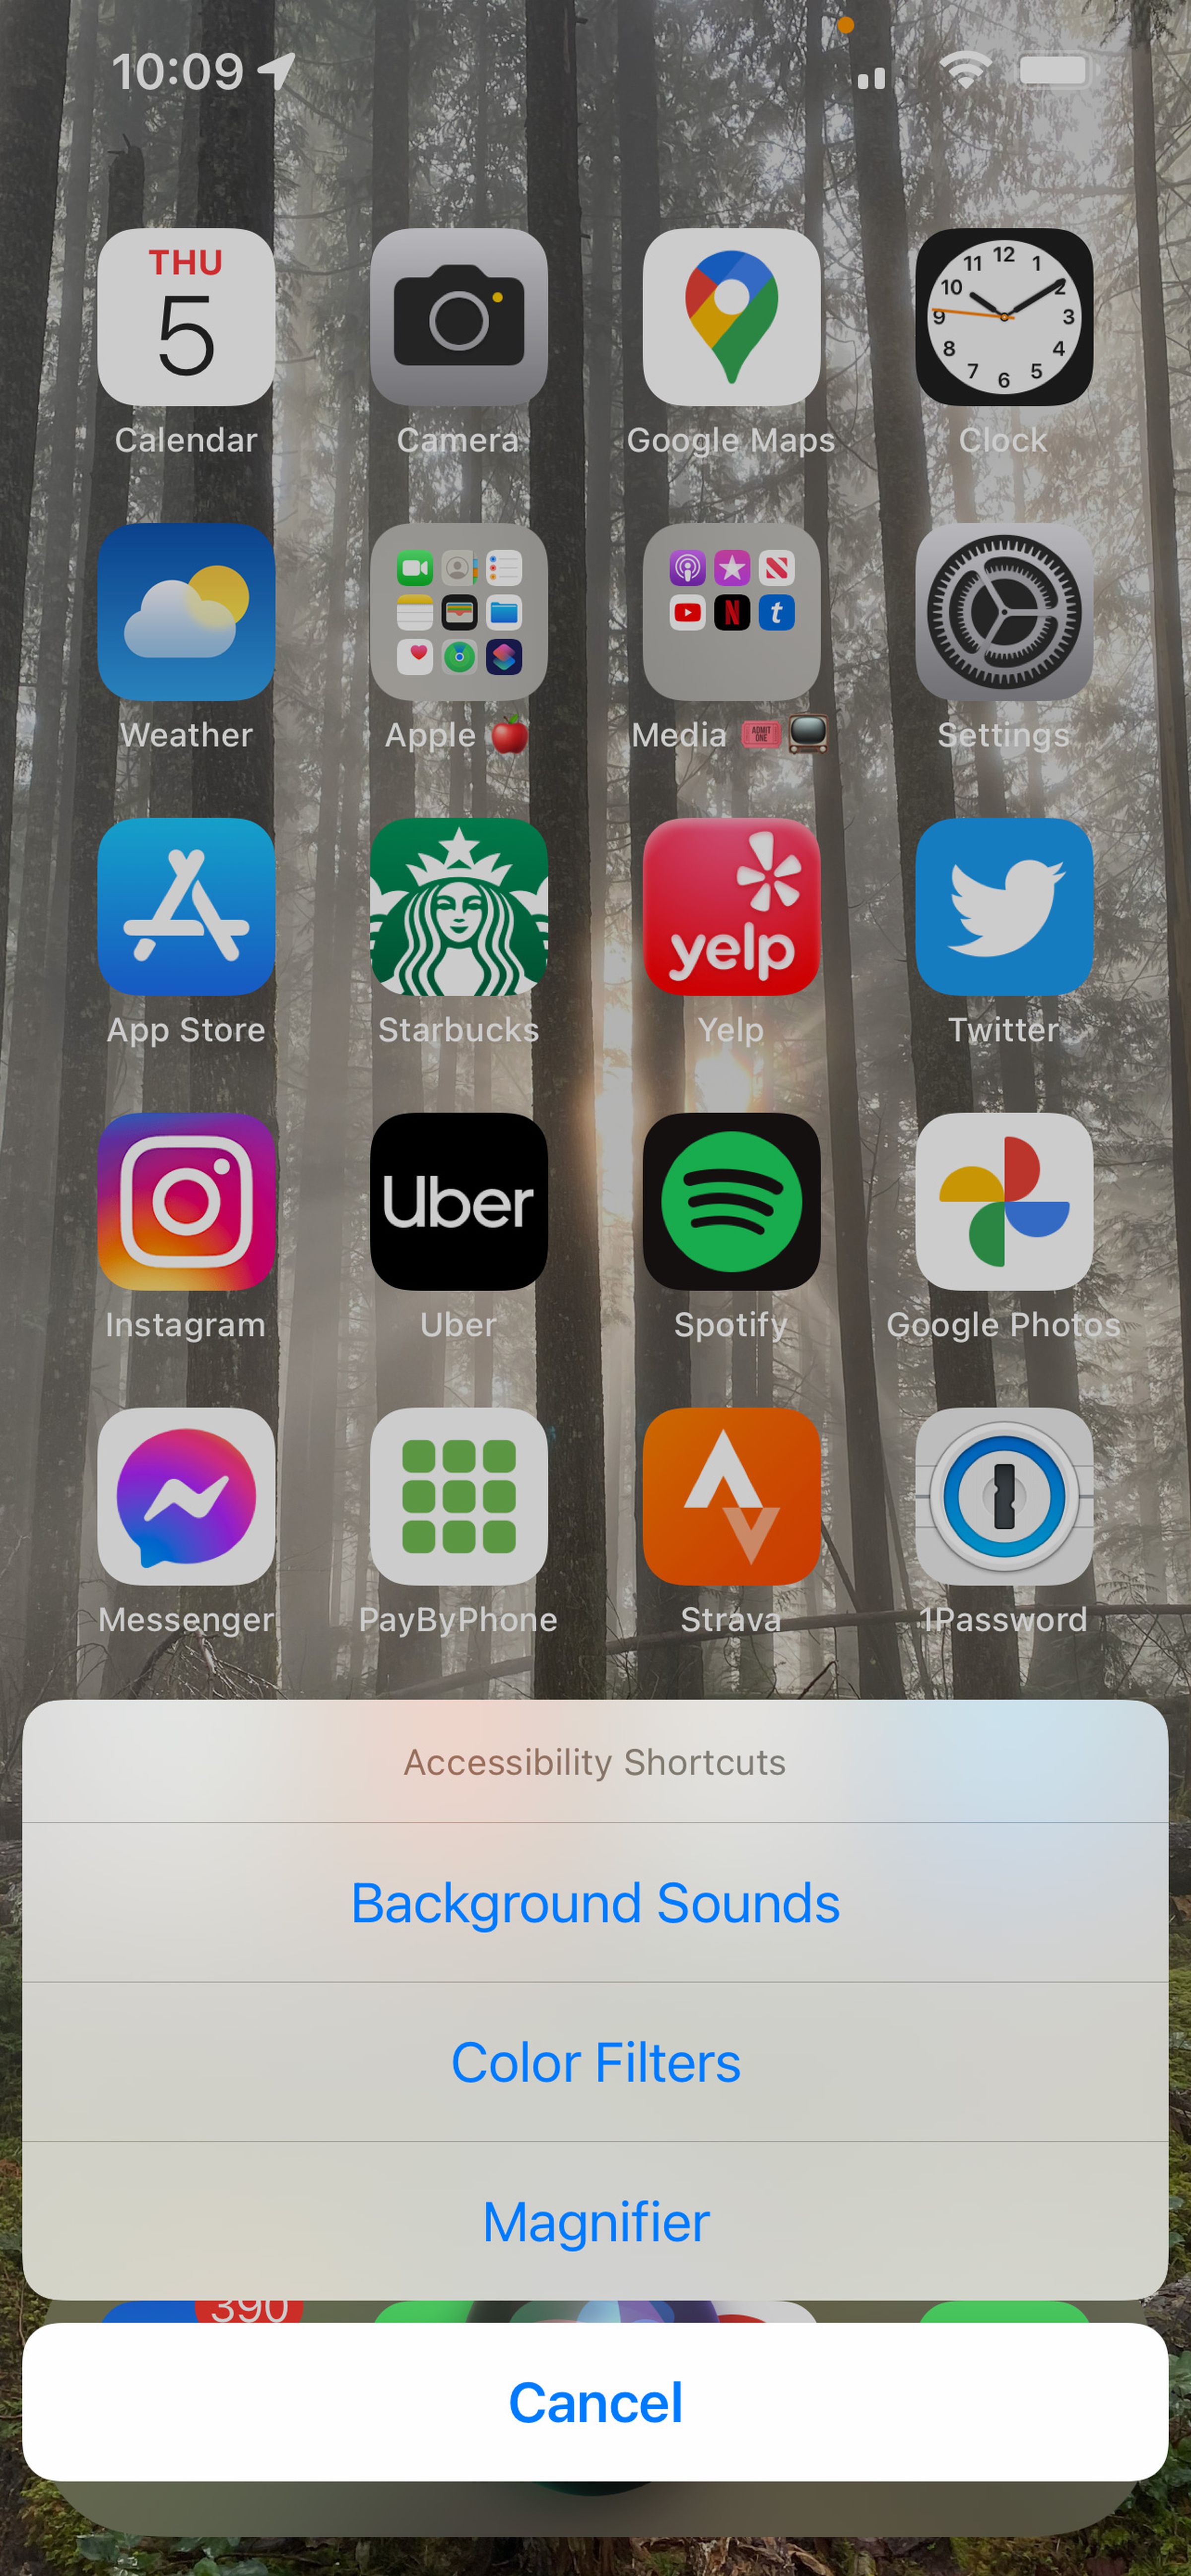 The functions you select will appear in a menu when you launch Accessibility Shortcut.